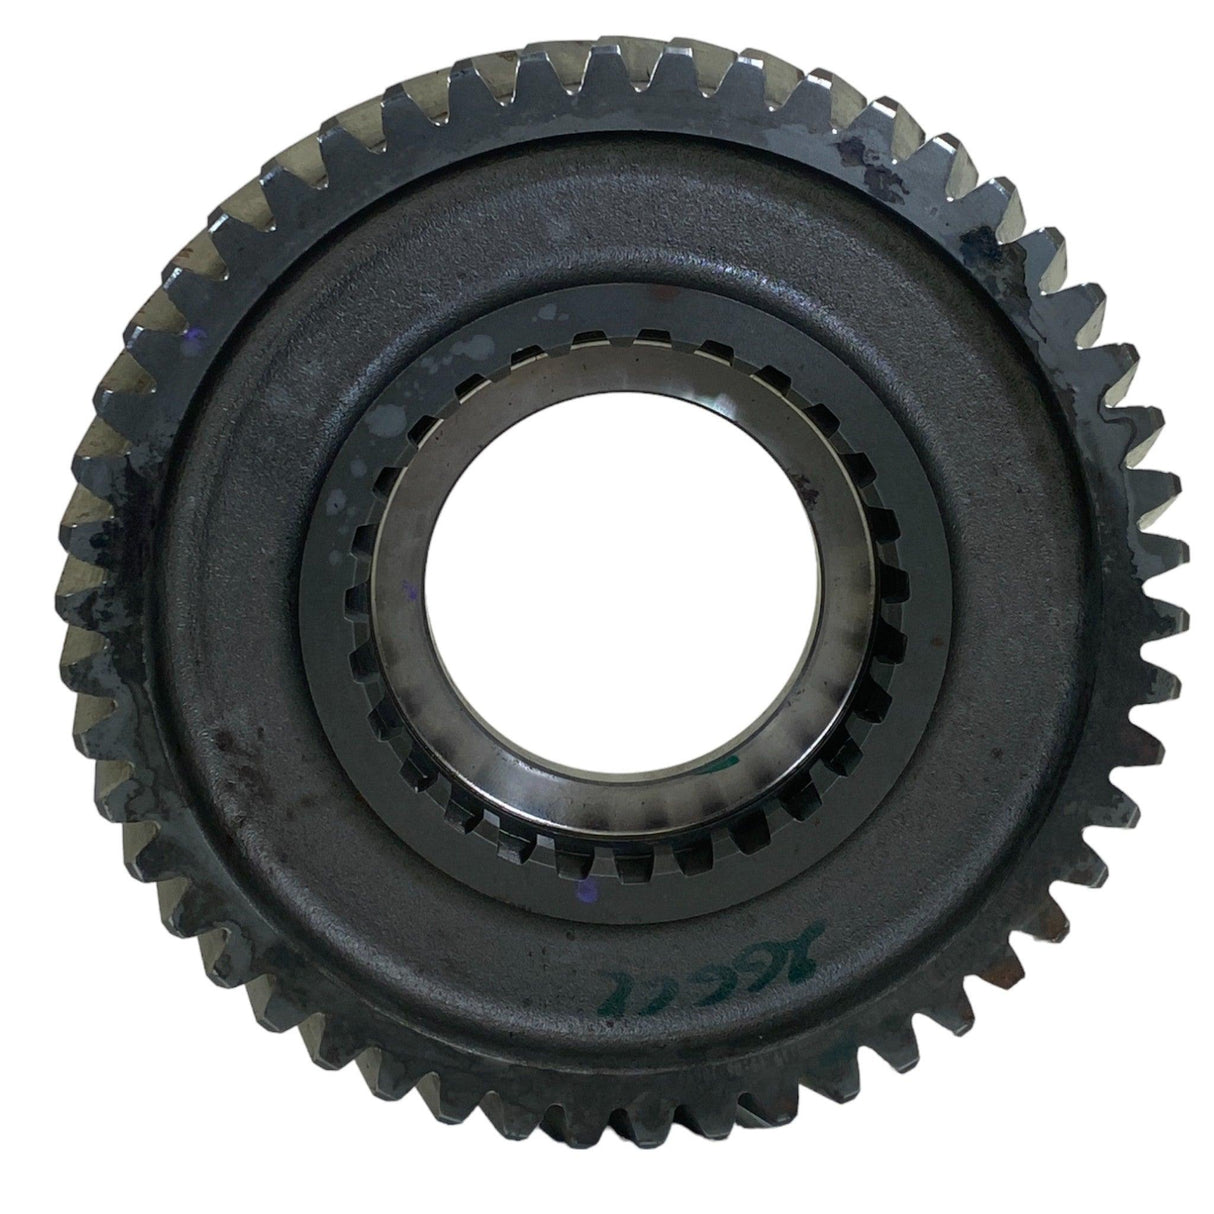 E87-6004 10000699 Oem Paccar Fuller Mainshaft Gear 2Nd For Paccarv.